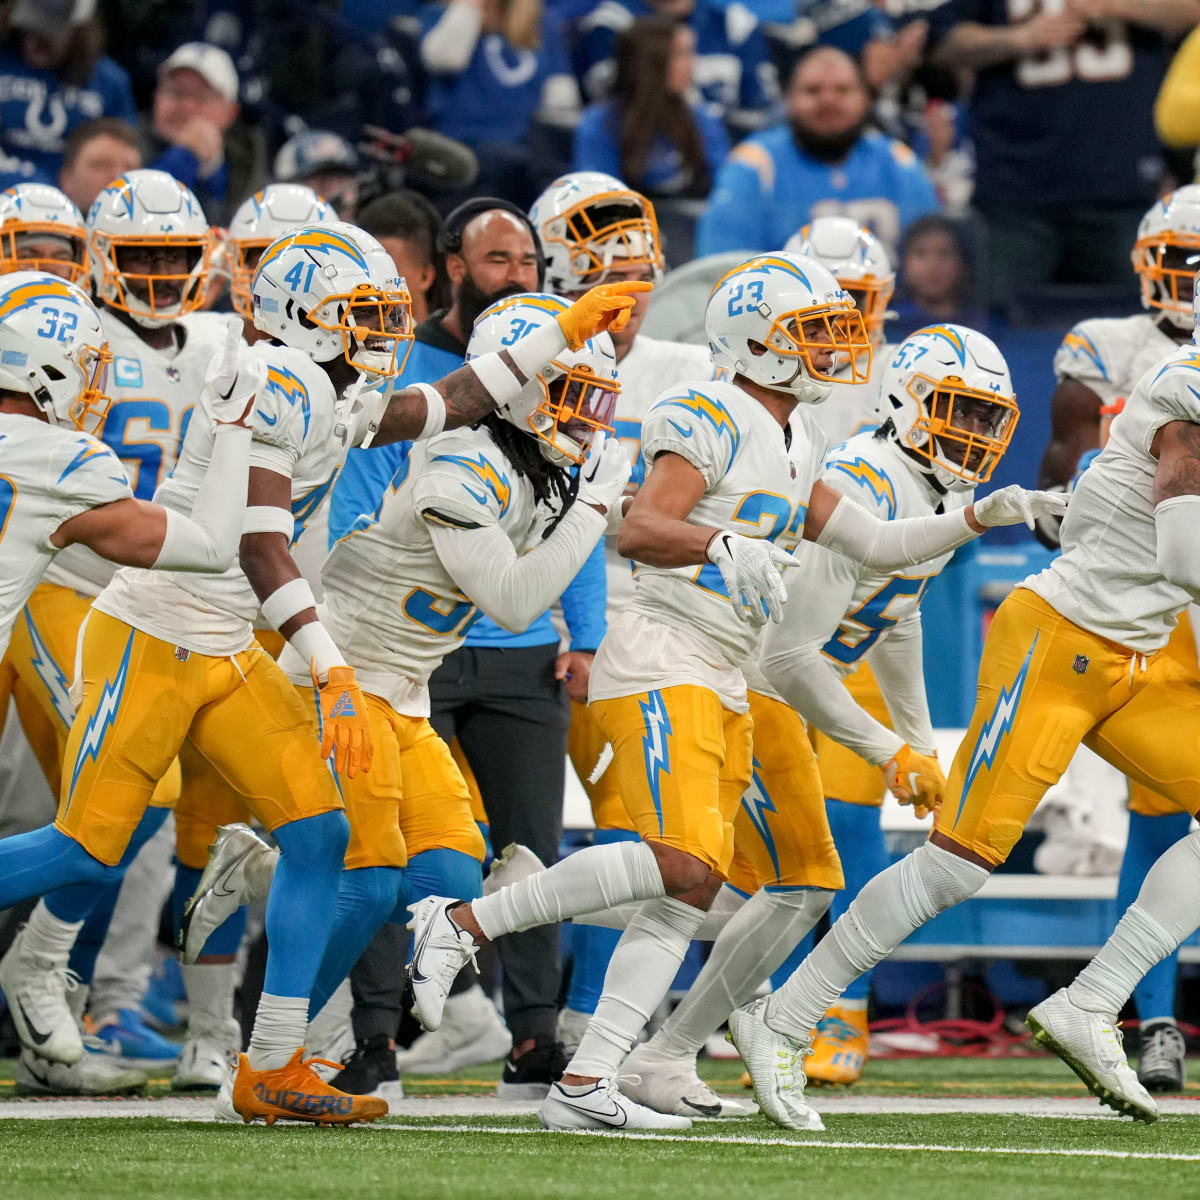 Chargers Playoff Picture: Bolts on track for No. 5 seed after BAL loses to  PIT - Bolts From The Blue